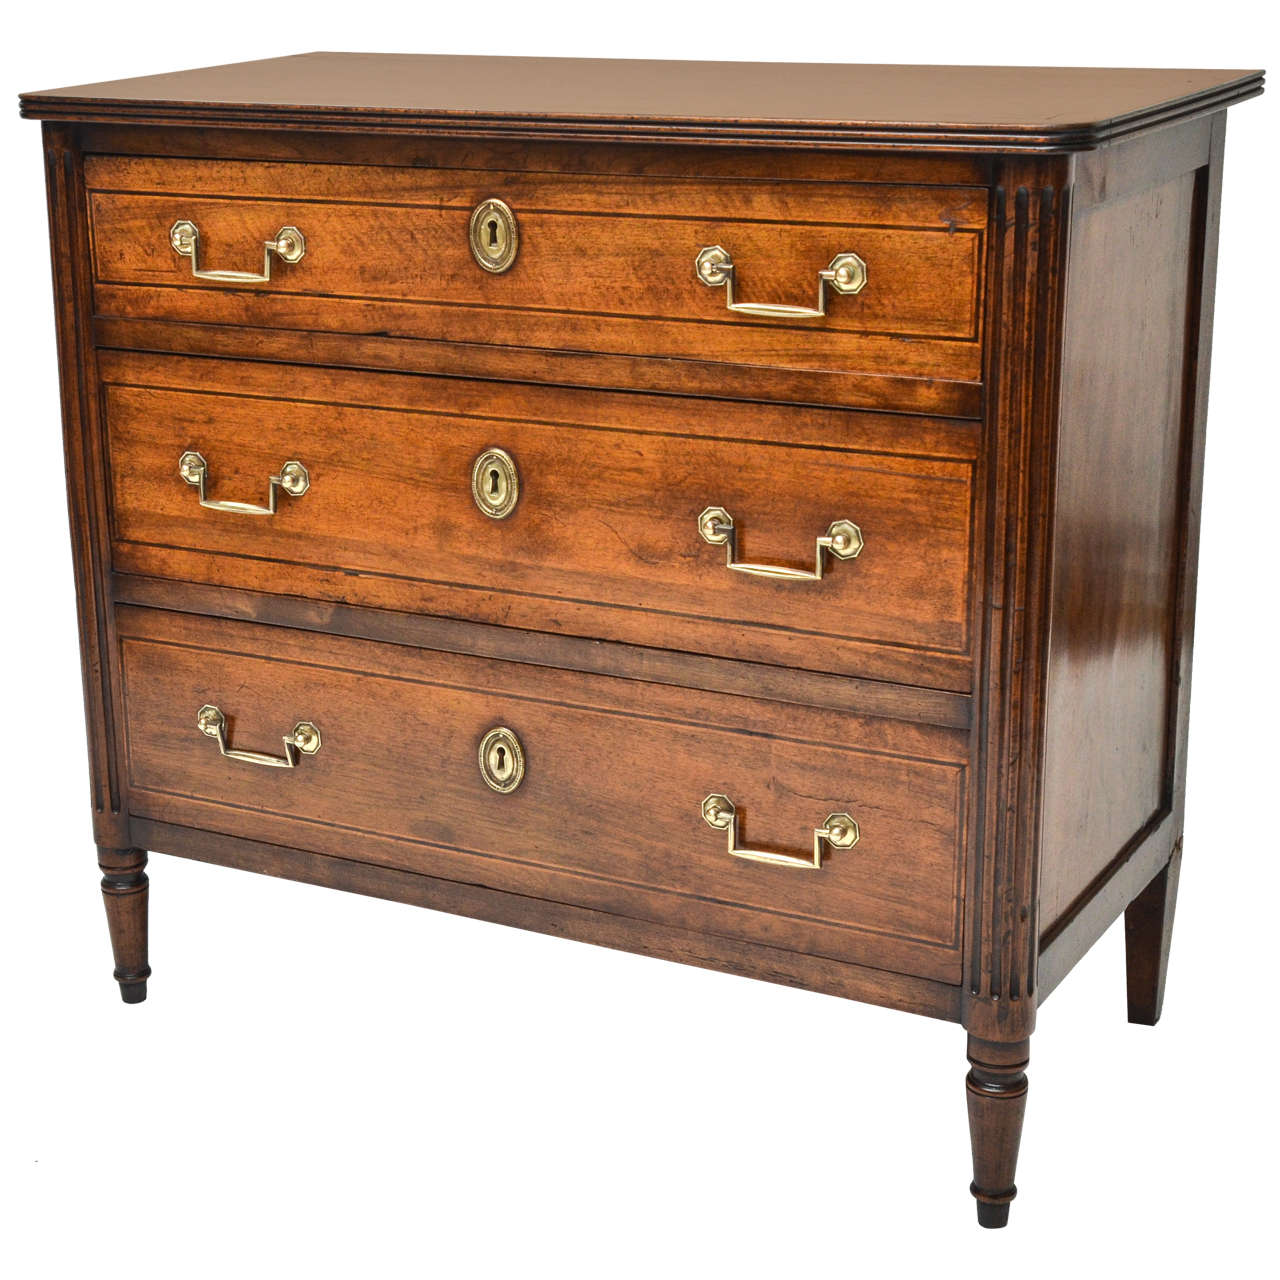 Early 19th Century Italian Walnut Chest of Drawers